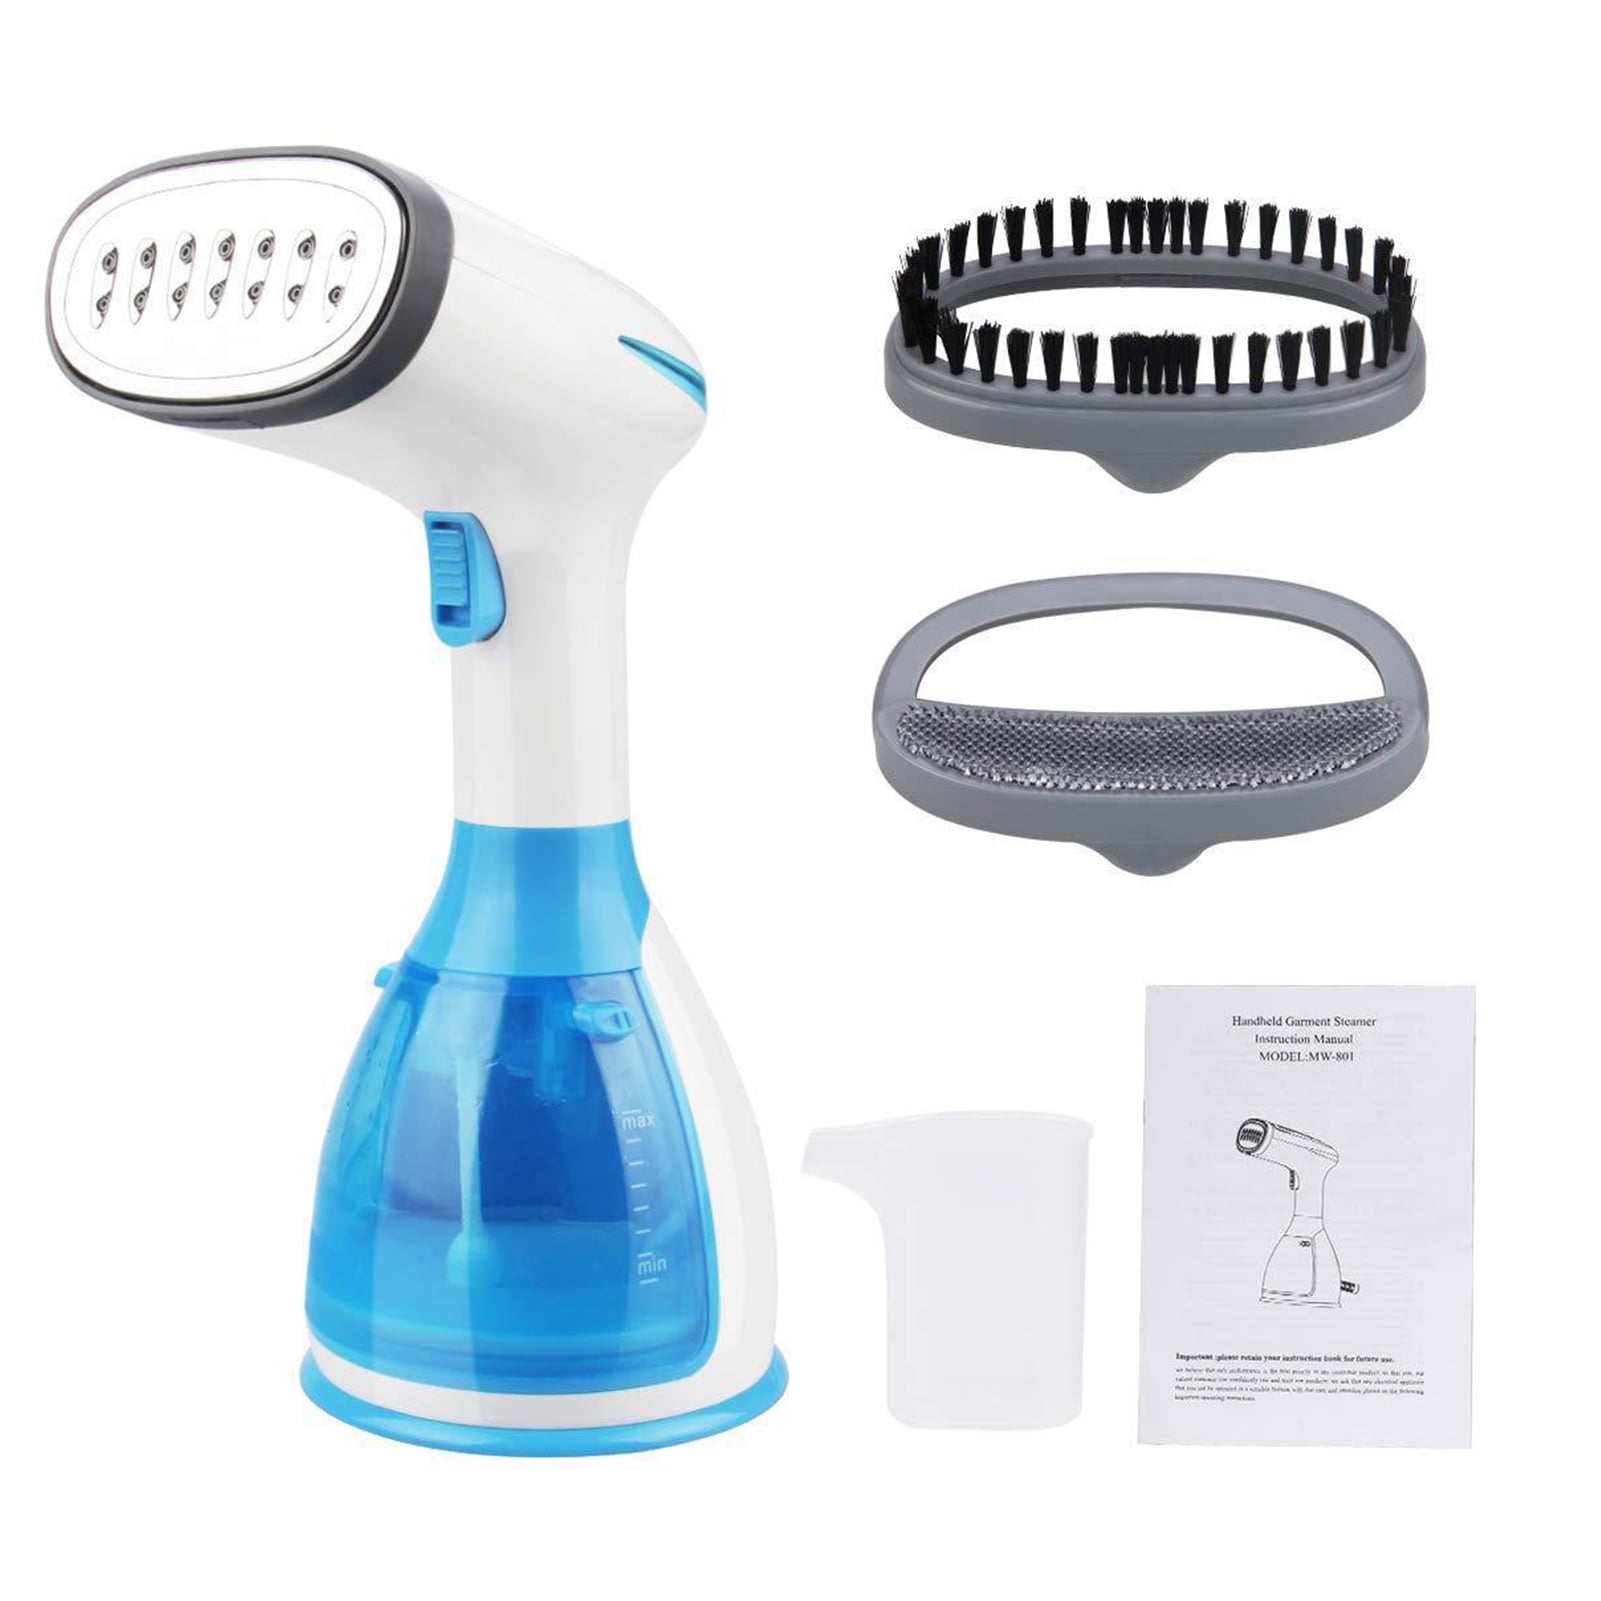 Details about   Clothes Portable Steam Iron Home Handheld Fabric Laundry Steamer Brush Travel US 